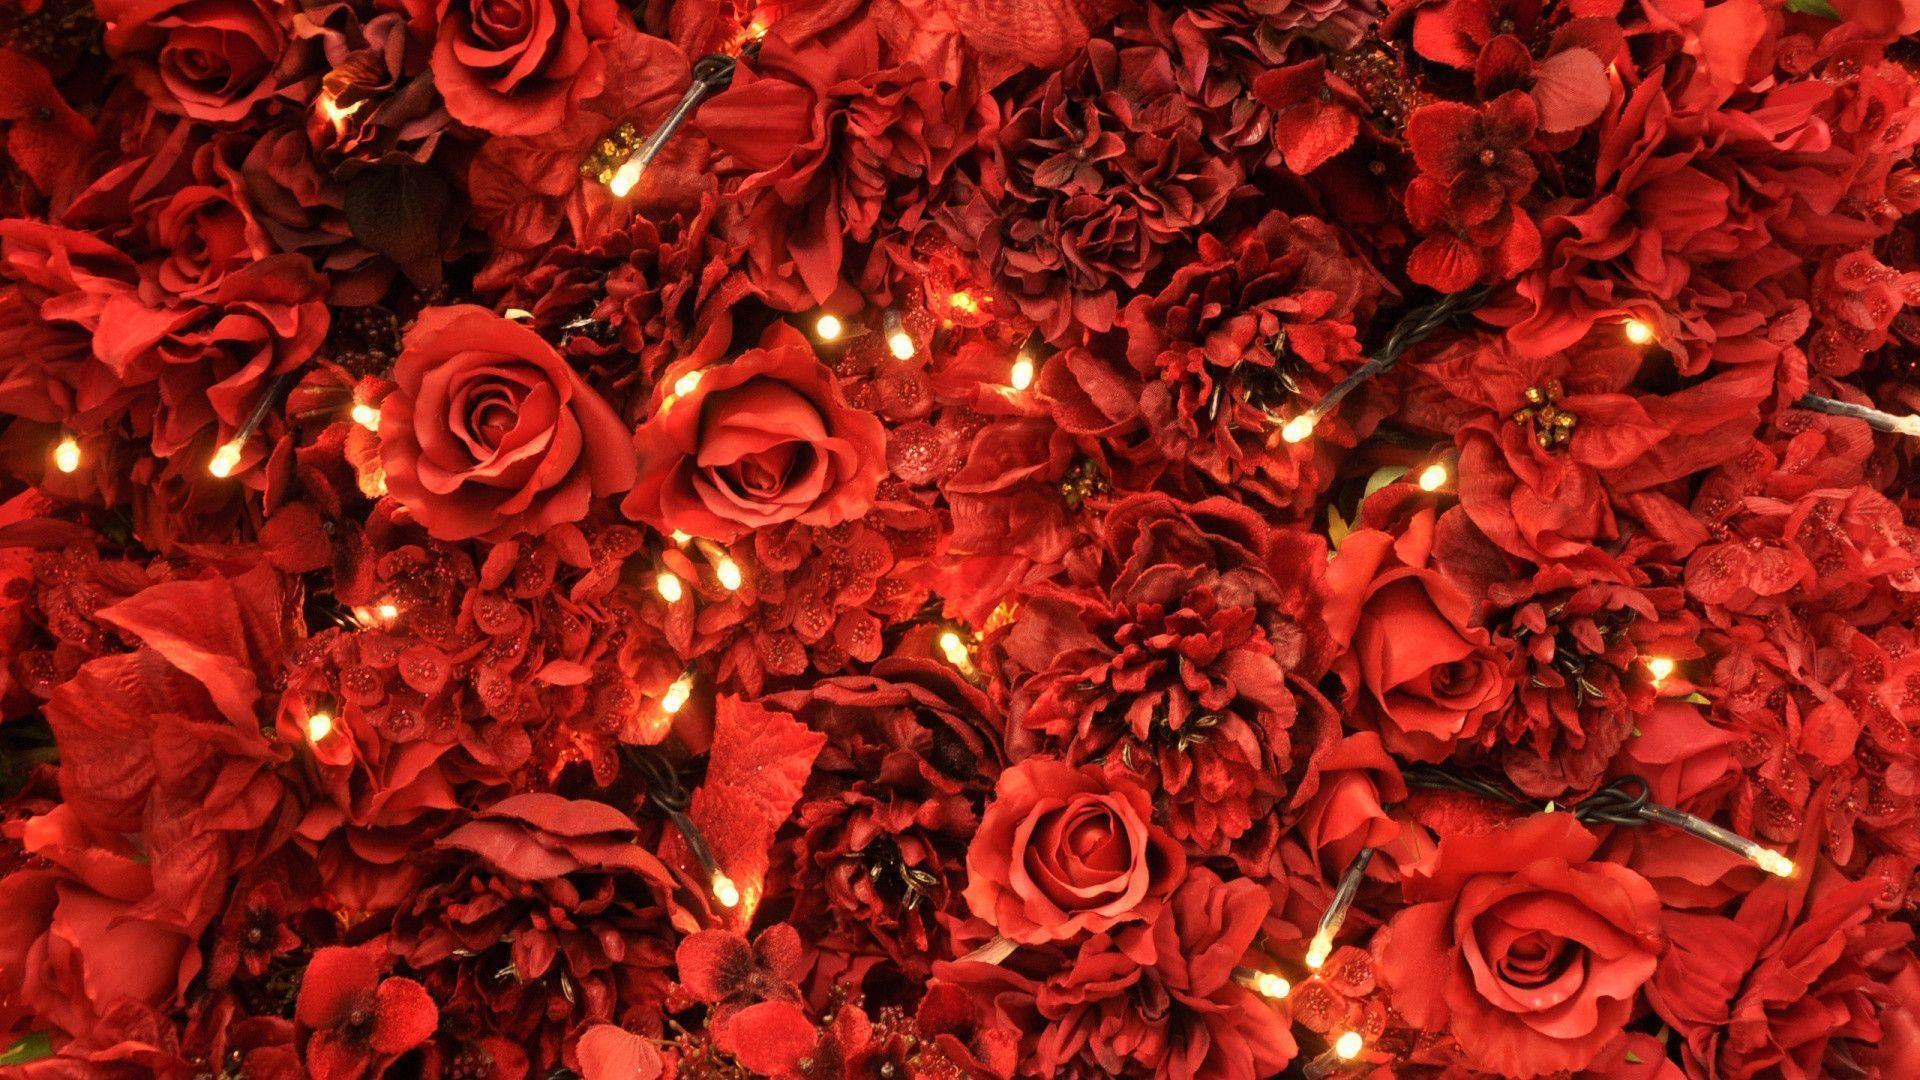 Red Rose Tumblr Background